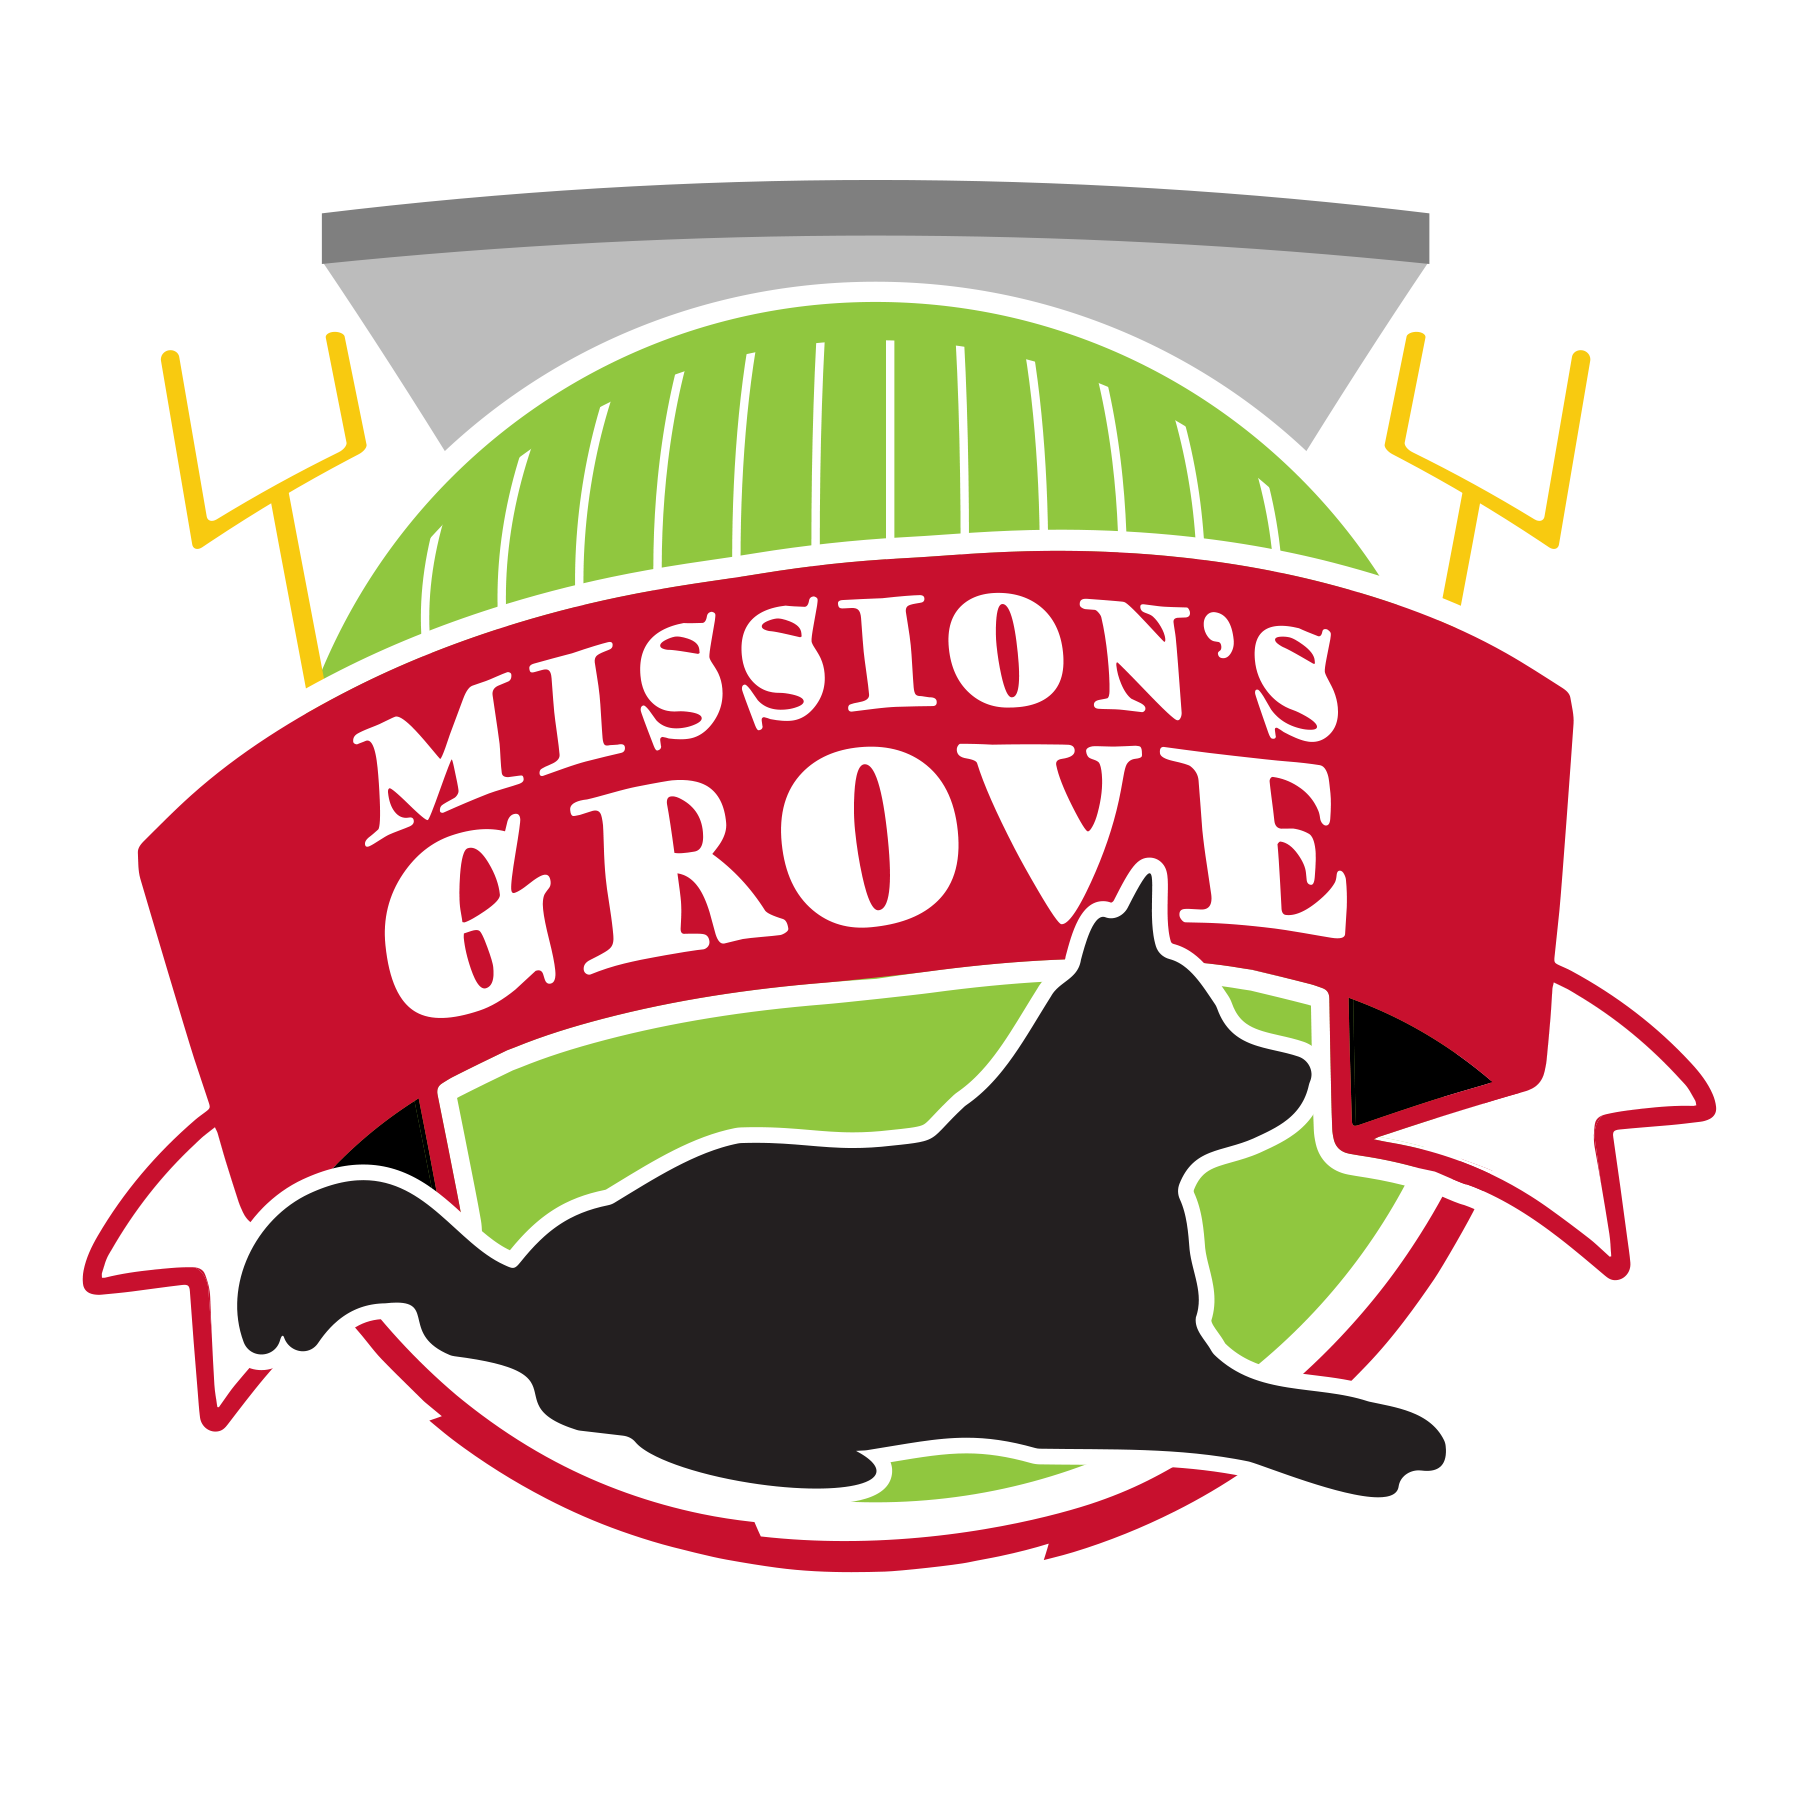 Mission's Grove